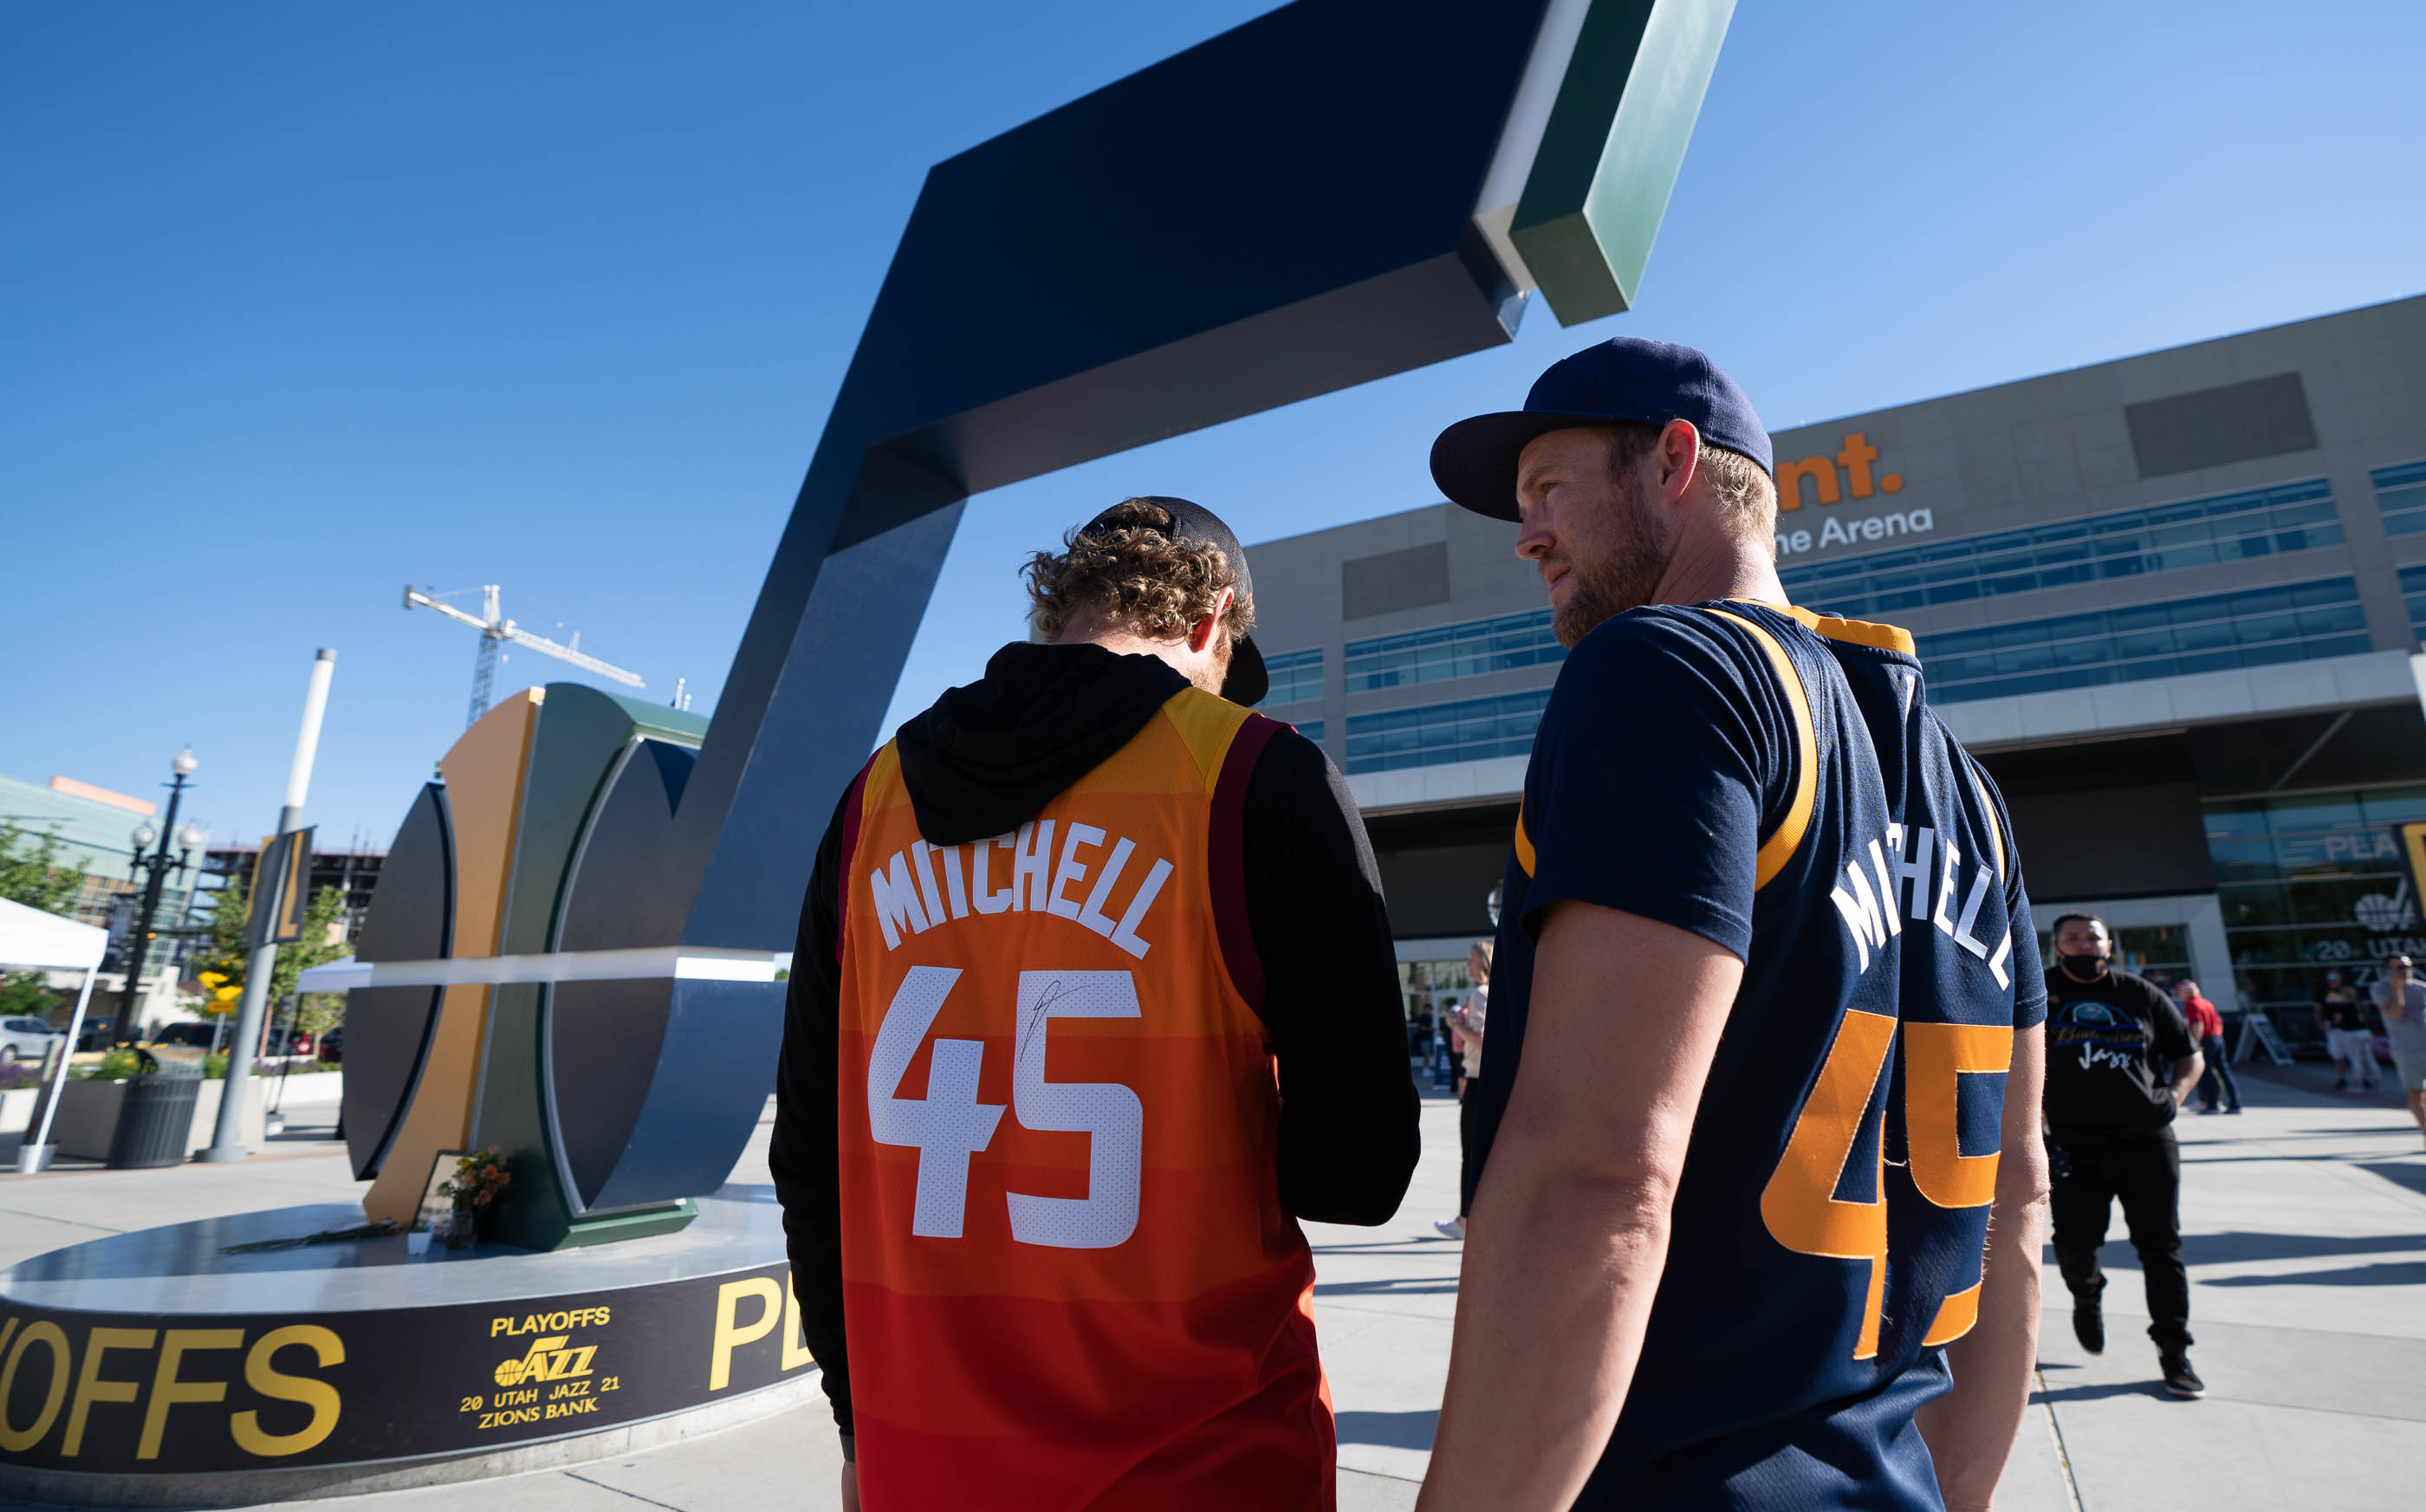 How can I watch Utah Jazz games this season? Heres a guide to TV packages and streaming options.